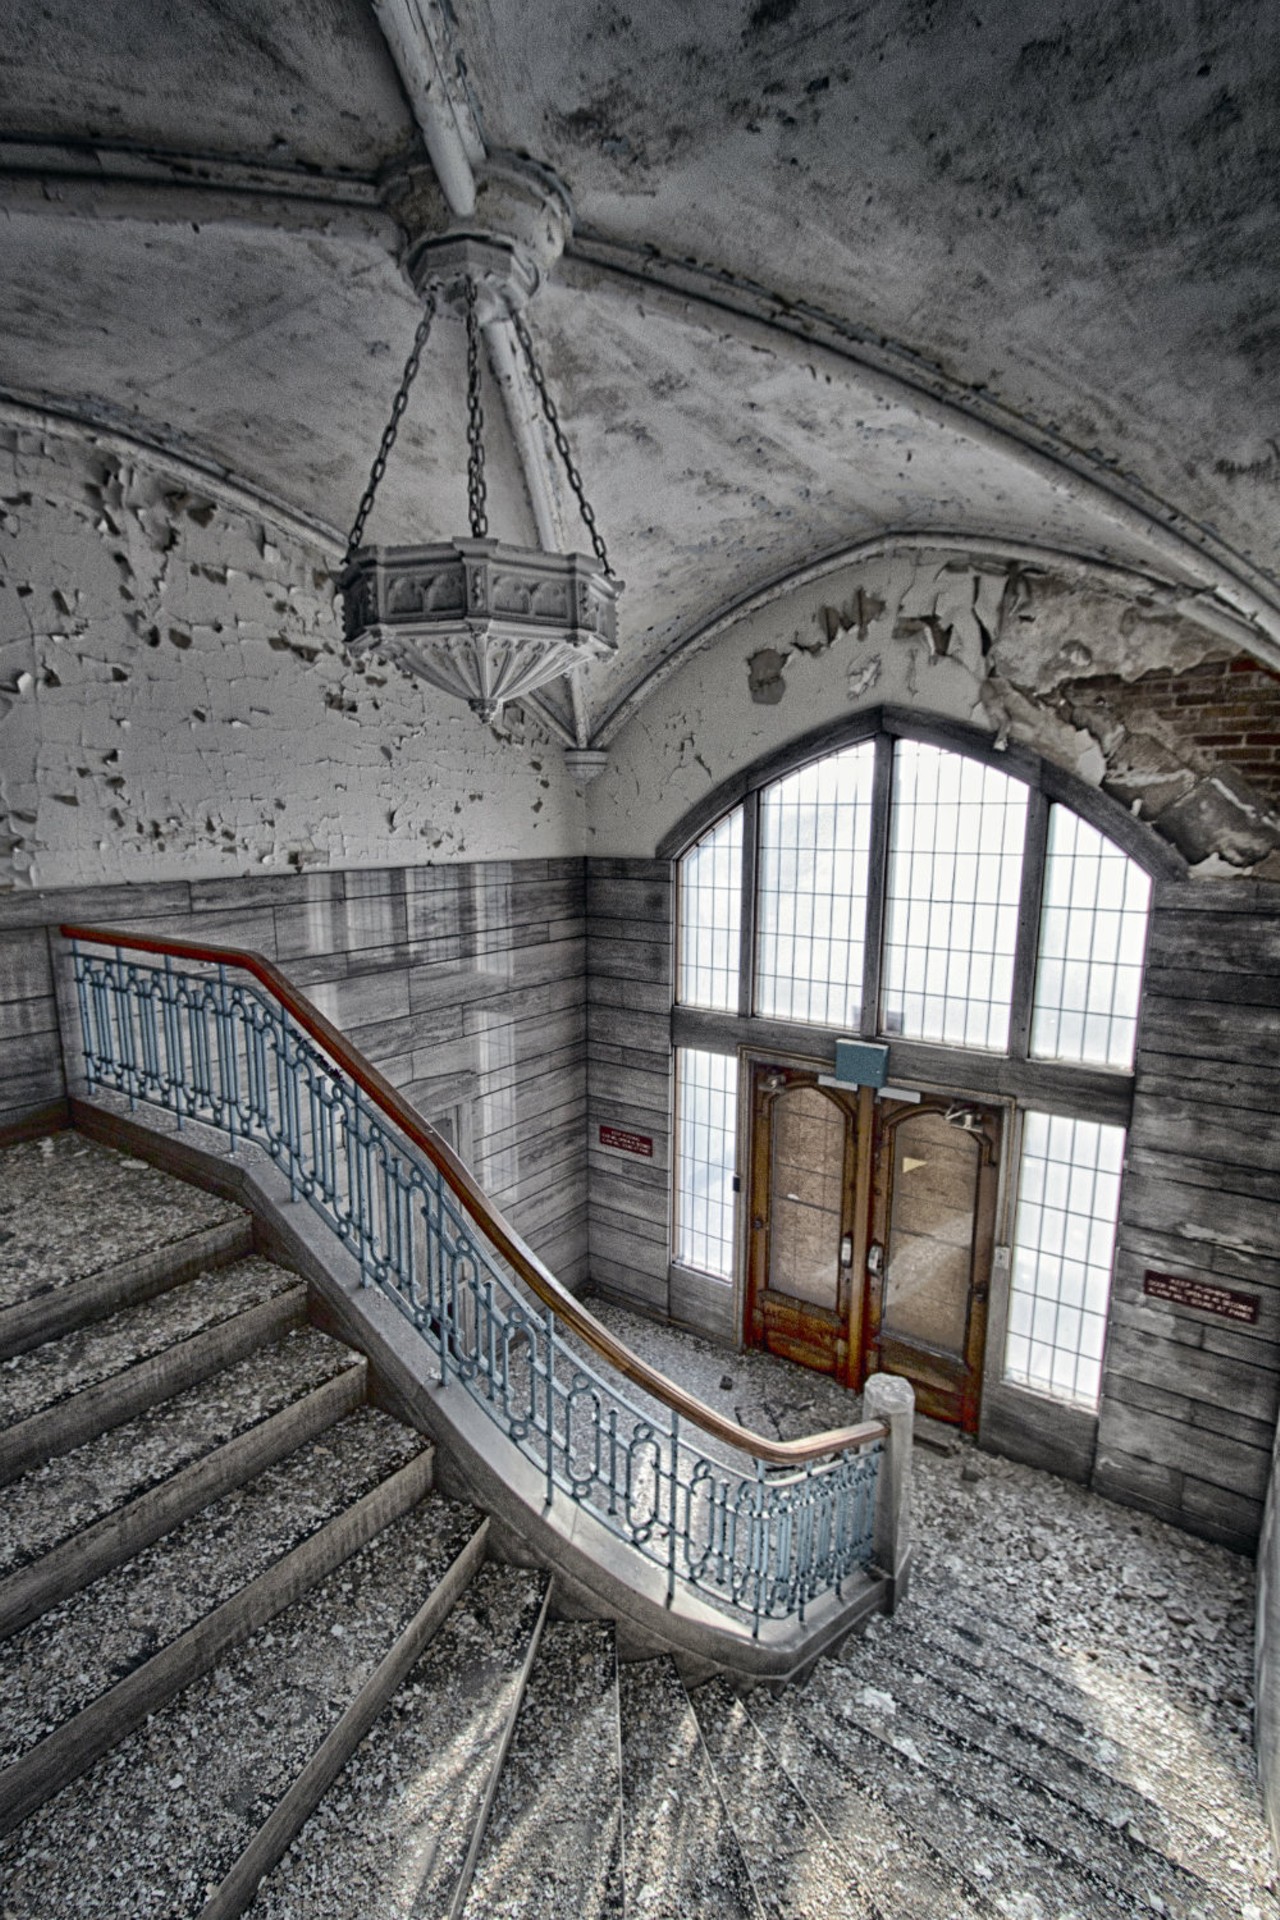 Title:  Marble Staircase 
School: Scullin School
Photographer: Ann Chartrand 